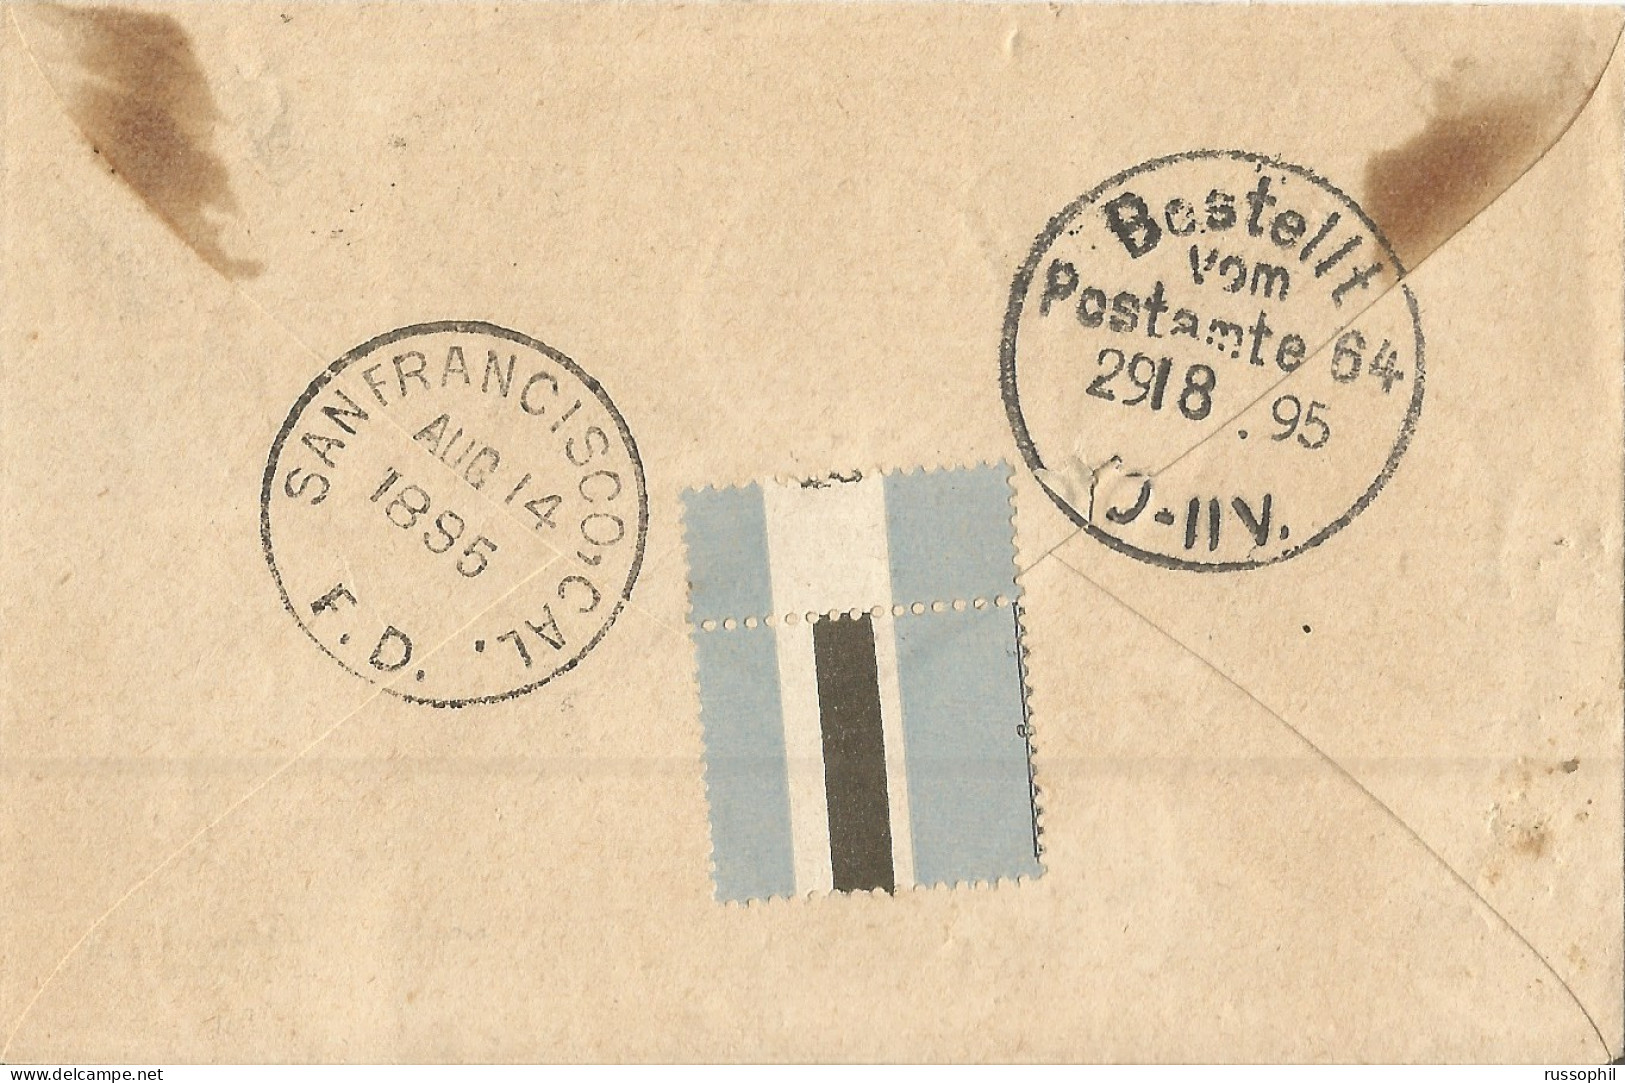 OCEANIE -  5 STAMP 20 CENT. UPRATED 5 CENT. POSTAL STATIONERY COVER FROM PAPEETE TO GERMANY - 1895 - Covers & Documents